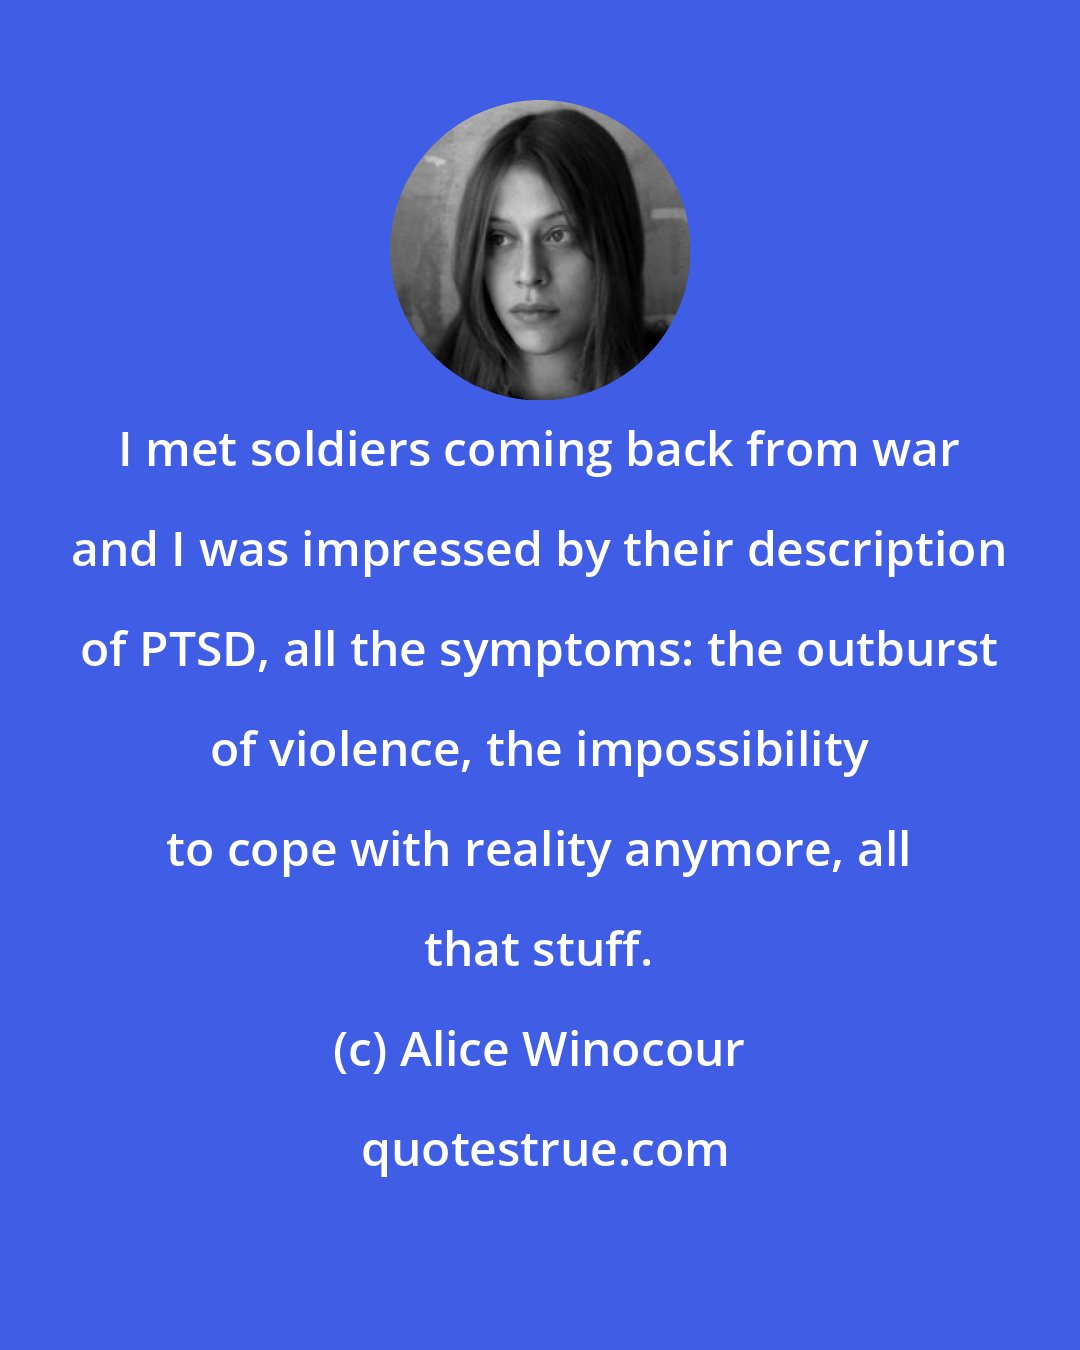 Alice Winocour: I met soldiers coming back from war and I was impressed by their description of PTSD, all the symptoms: the outburst of violence, the impossibility to cope with reality anymore, all that stuff.